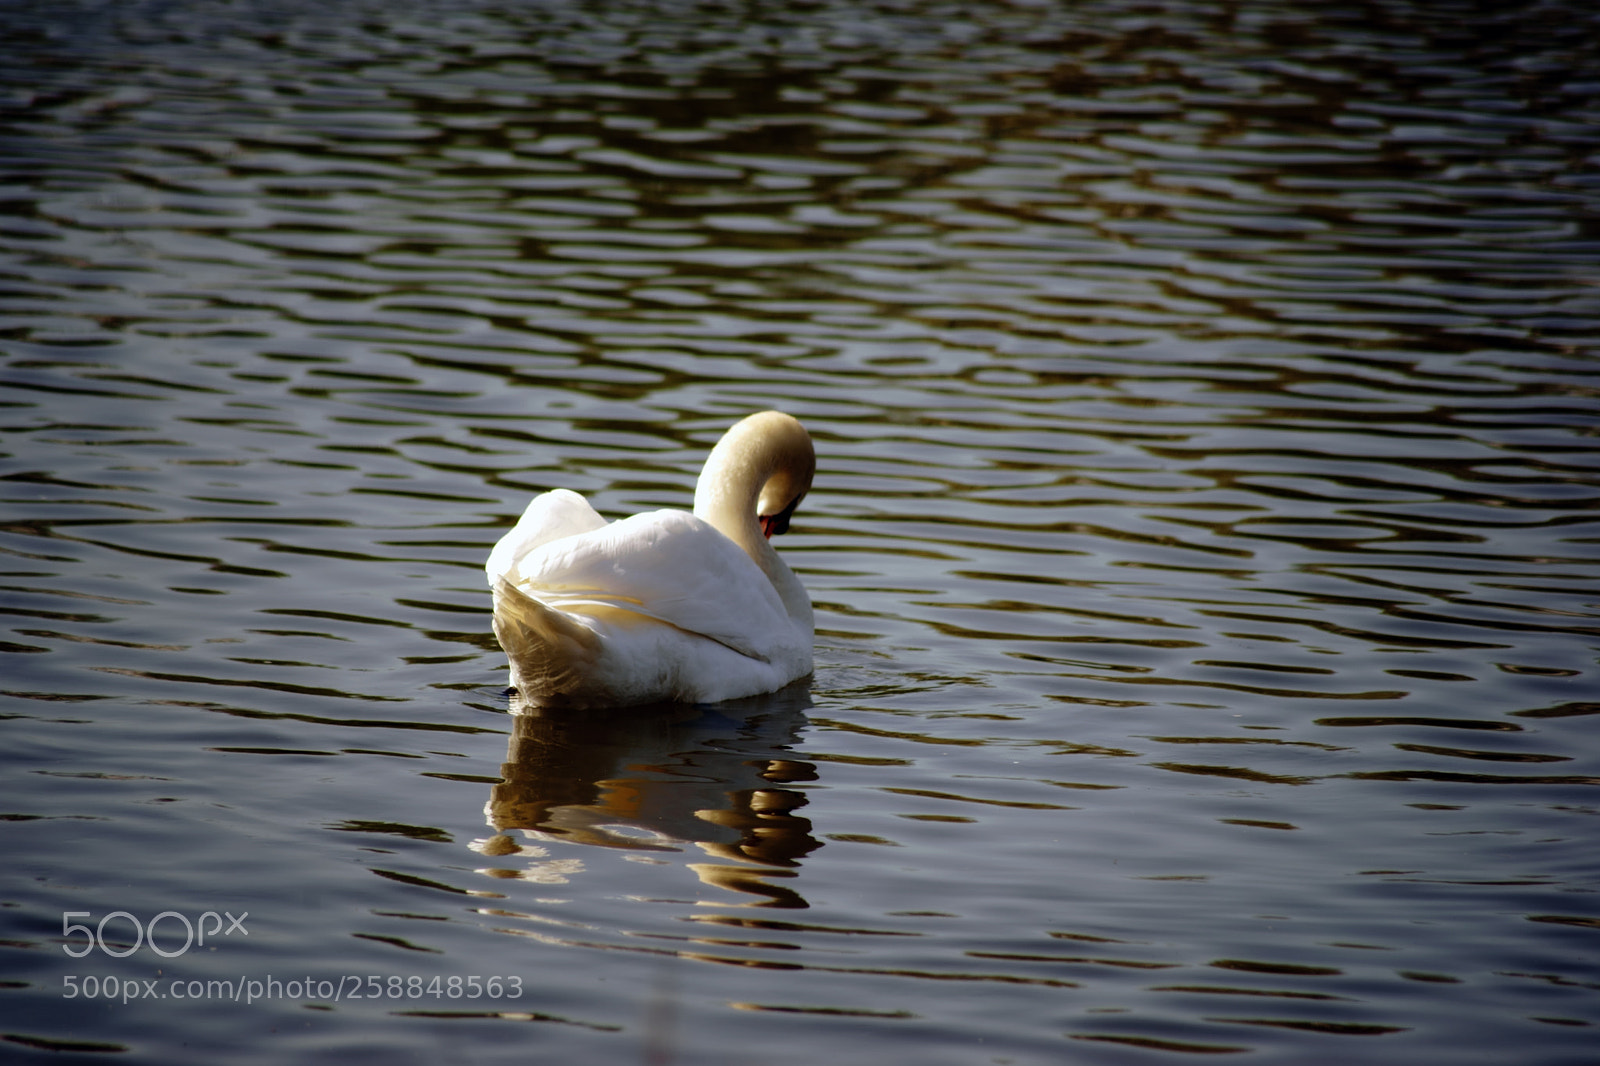 Sony a7 II sample photo. Swan is reflected in photography